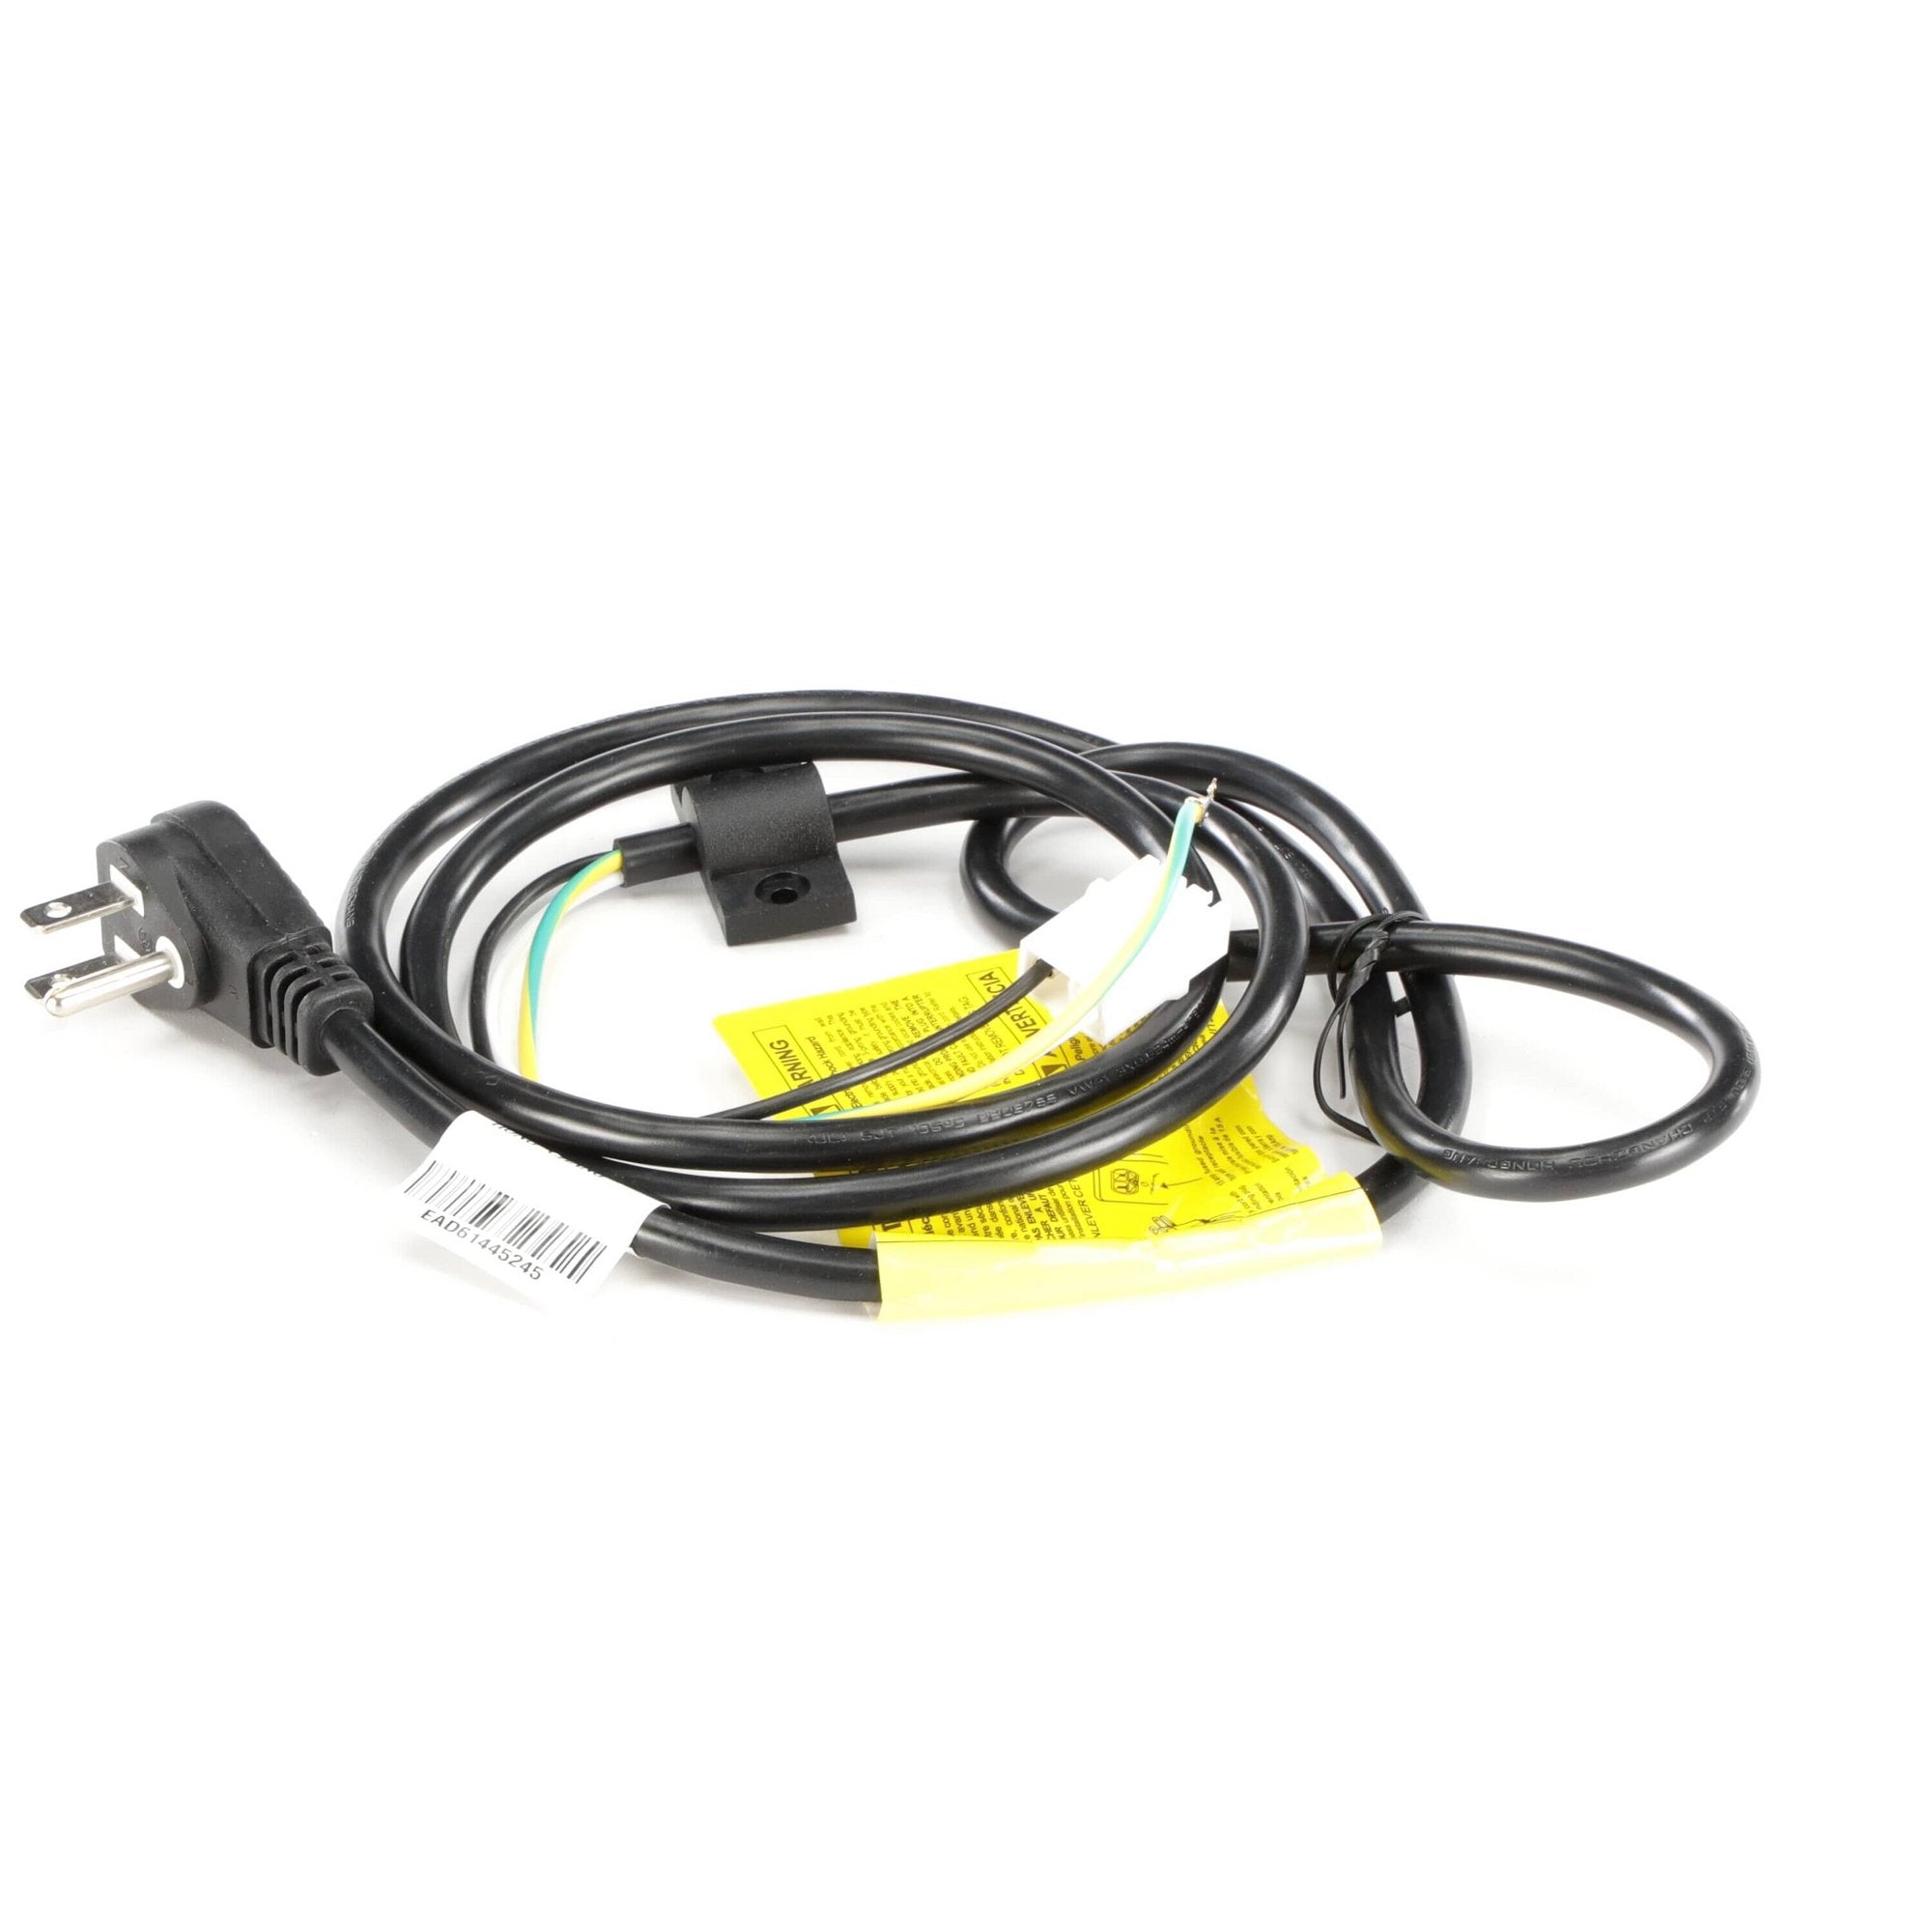 LG Refrigerator Power Cord Assembly - EAD61445245 New